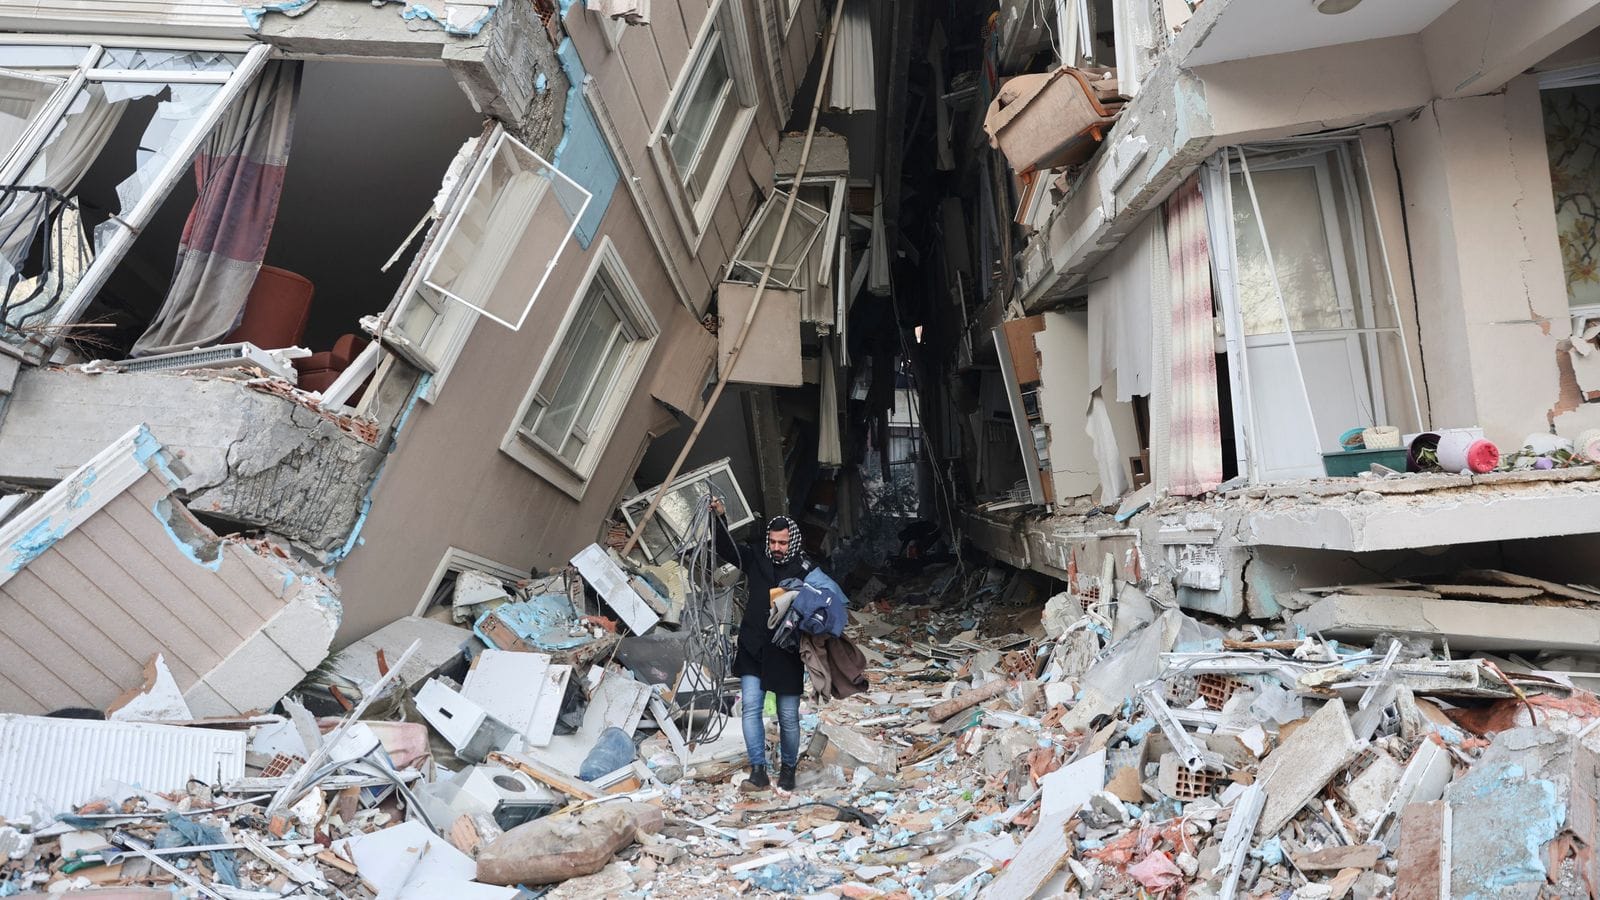 How to Become an AFAD Volunteer in the Wake of the 2023 Earthquake in Turkey